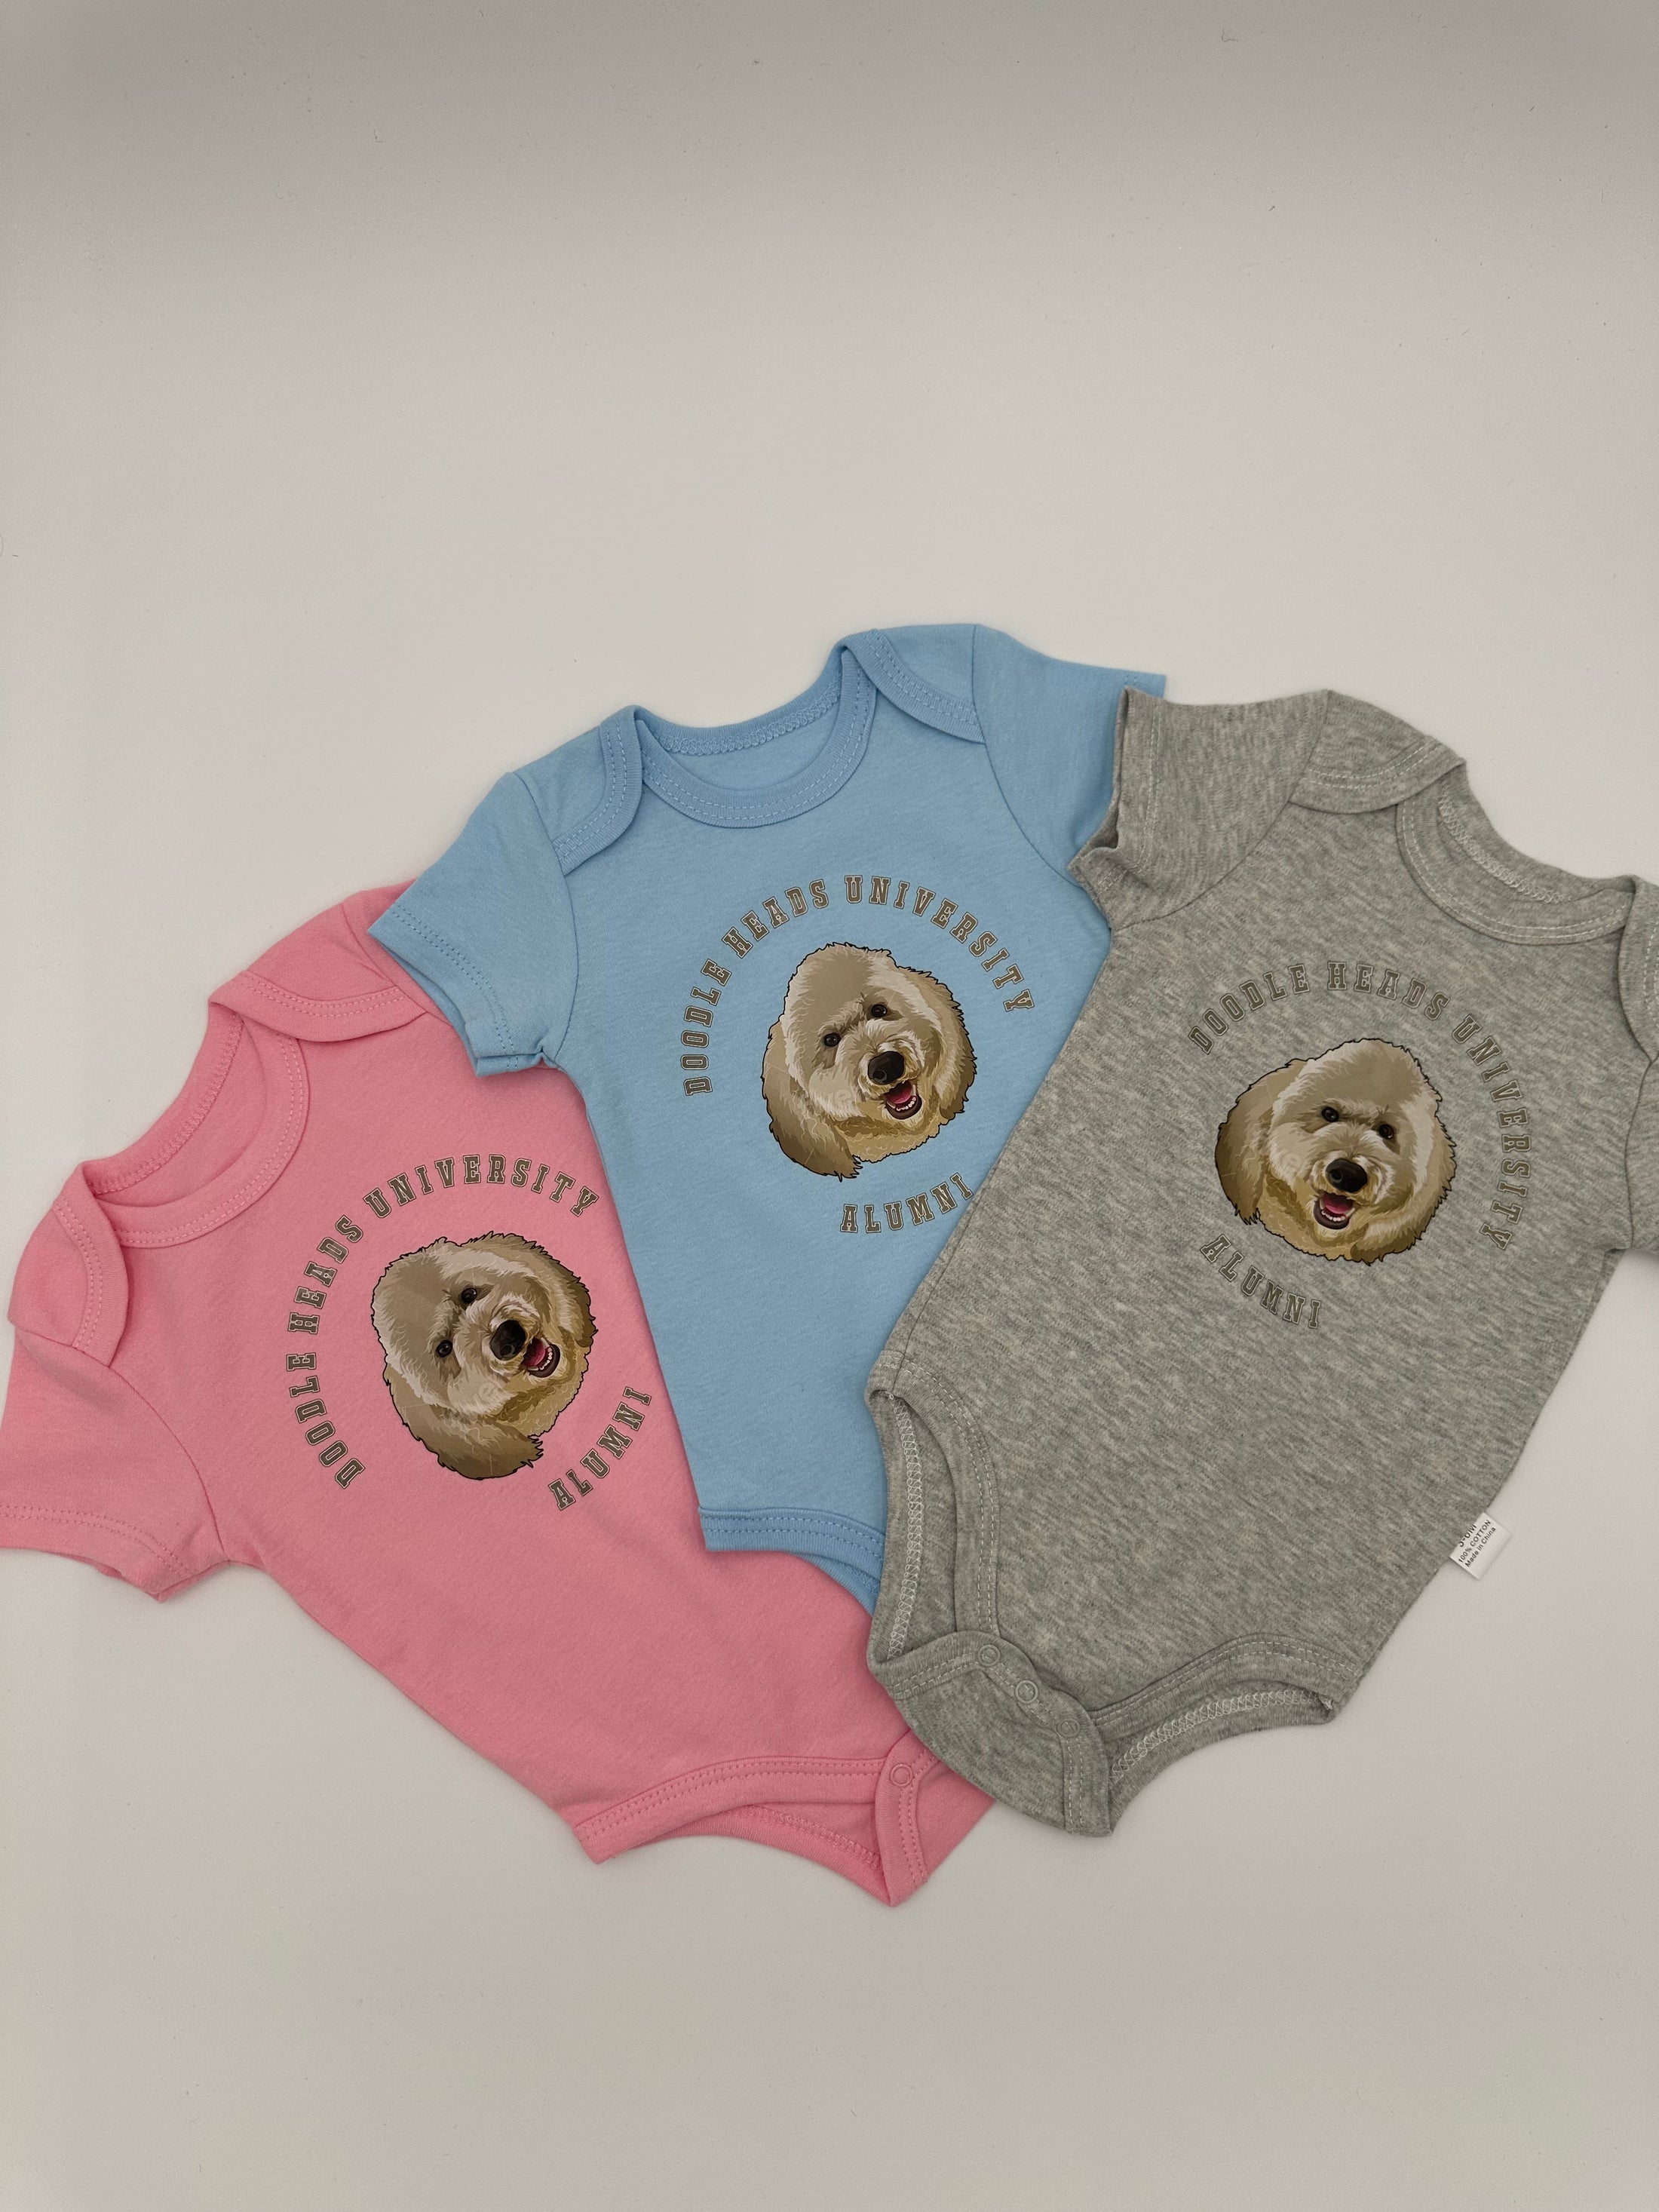 Doodle Heads Alumni Baby Onesie - Perfect for Your Little Graduate!